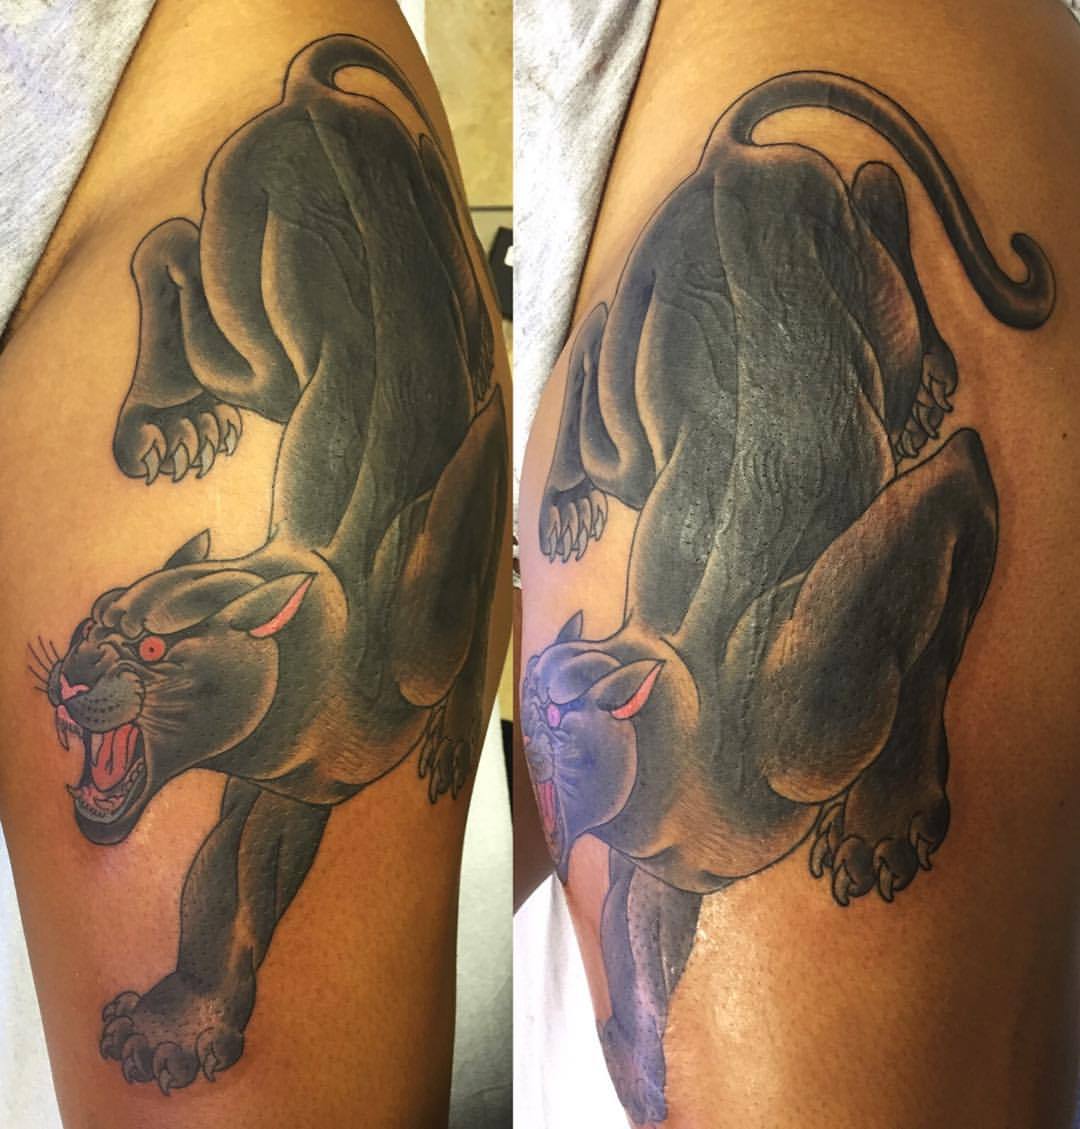 FACT: Panther tattoos will cover up any old...